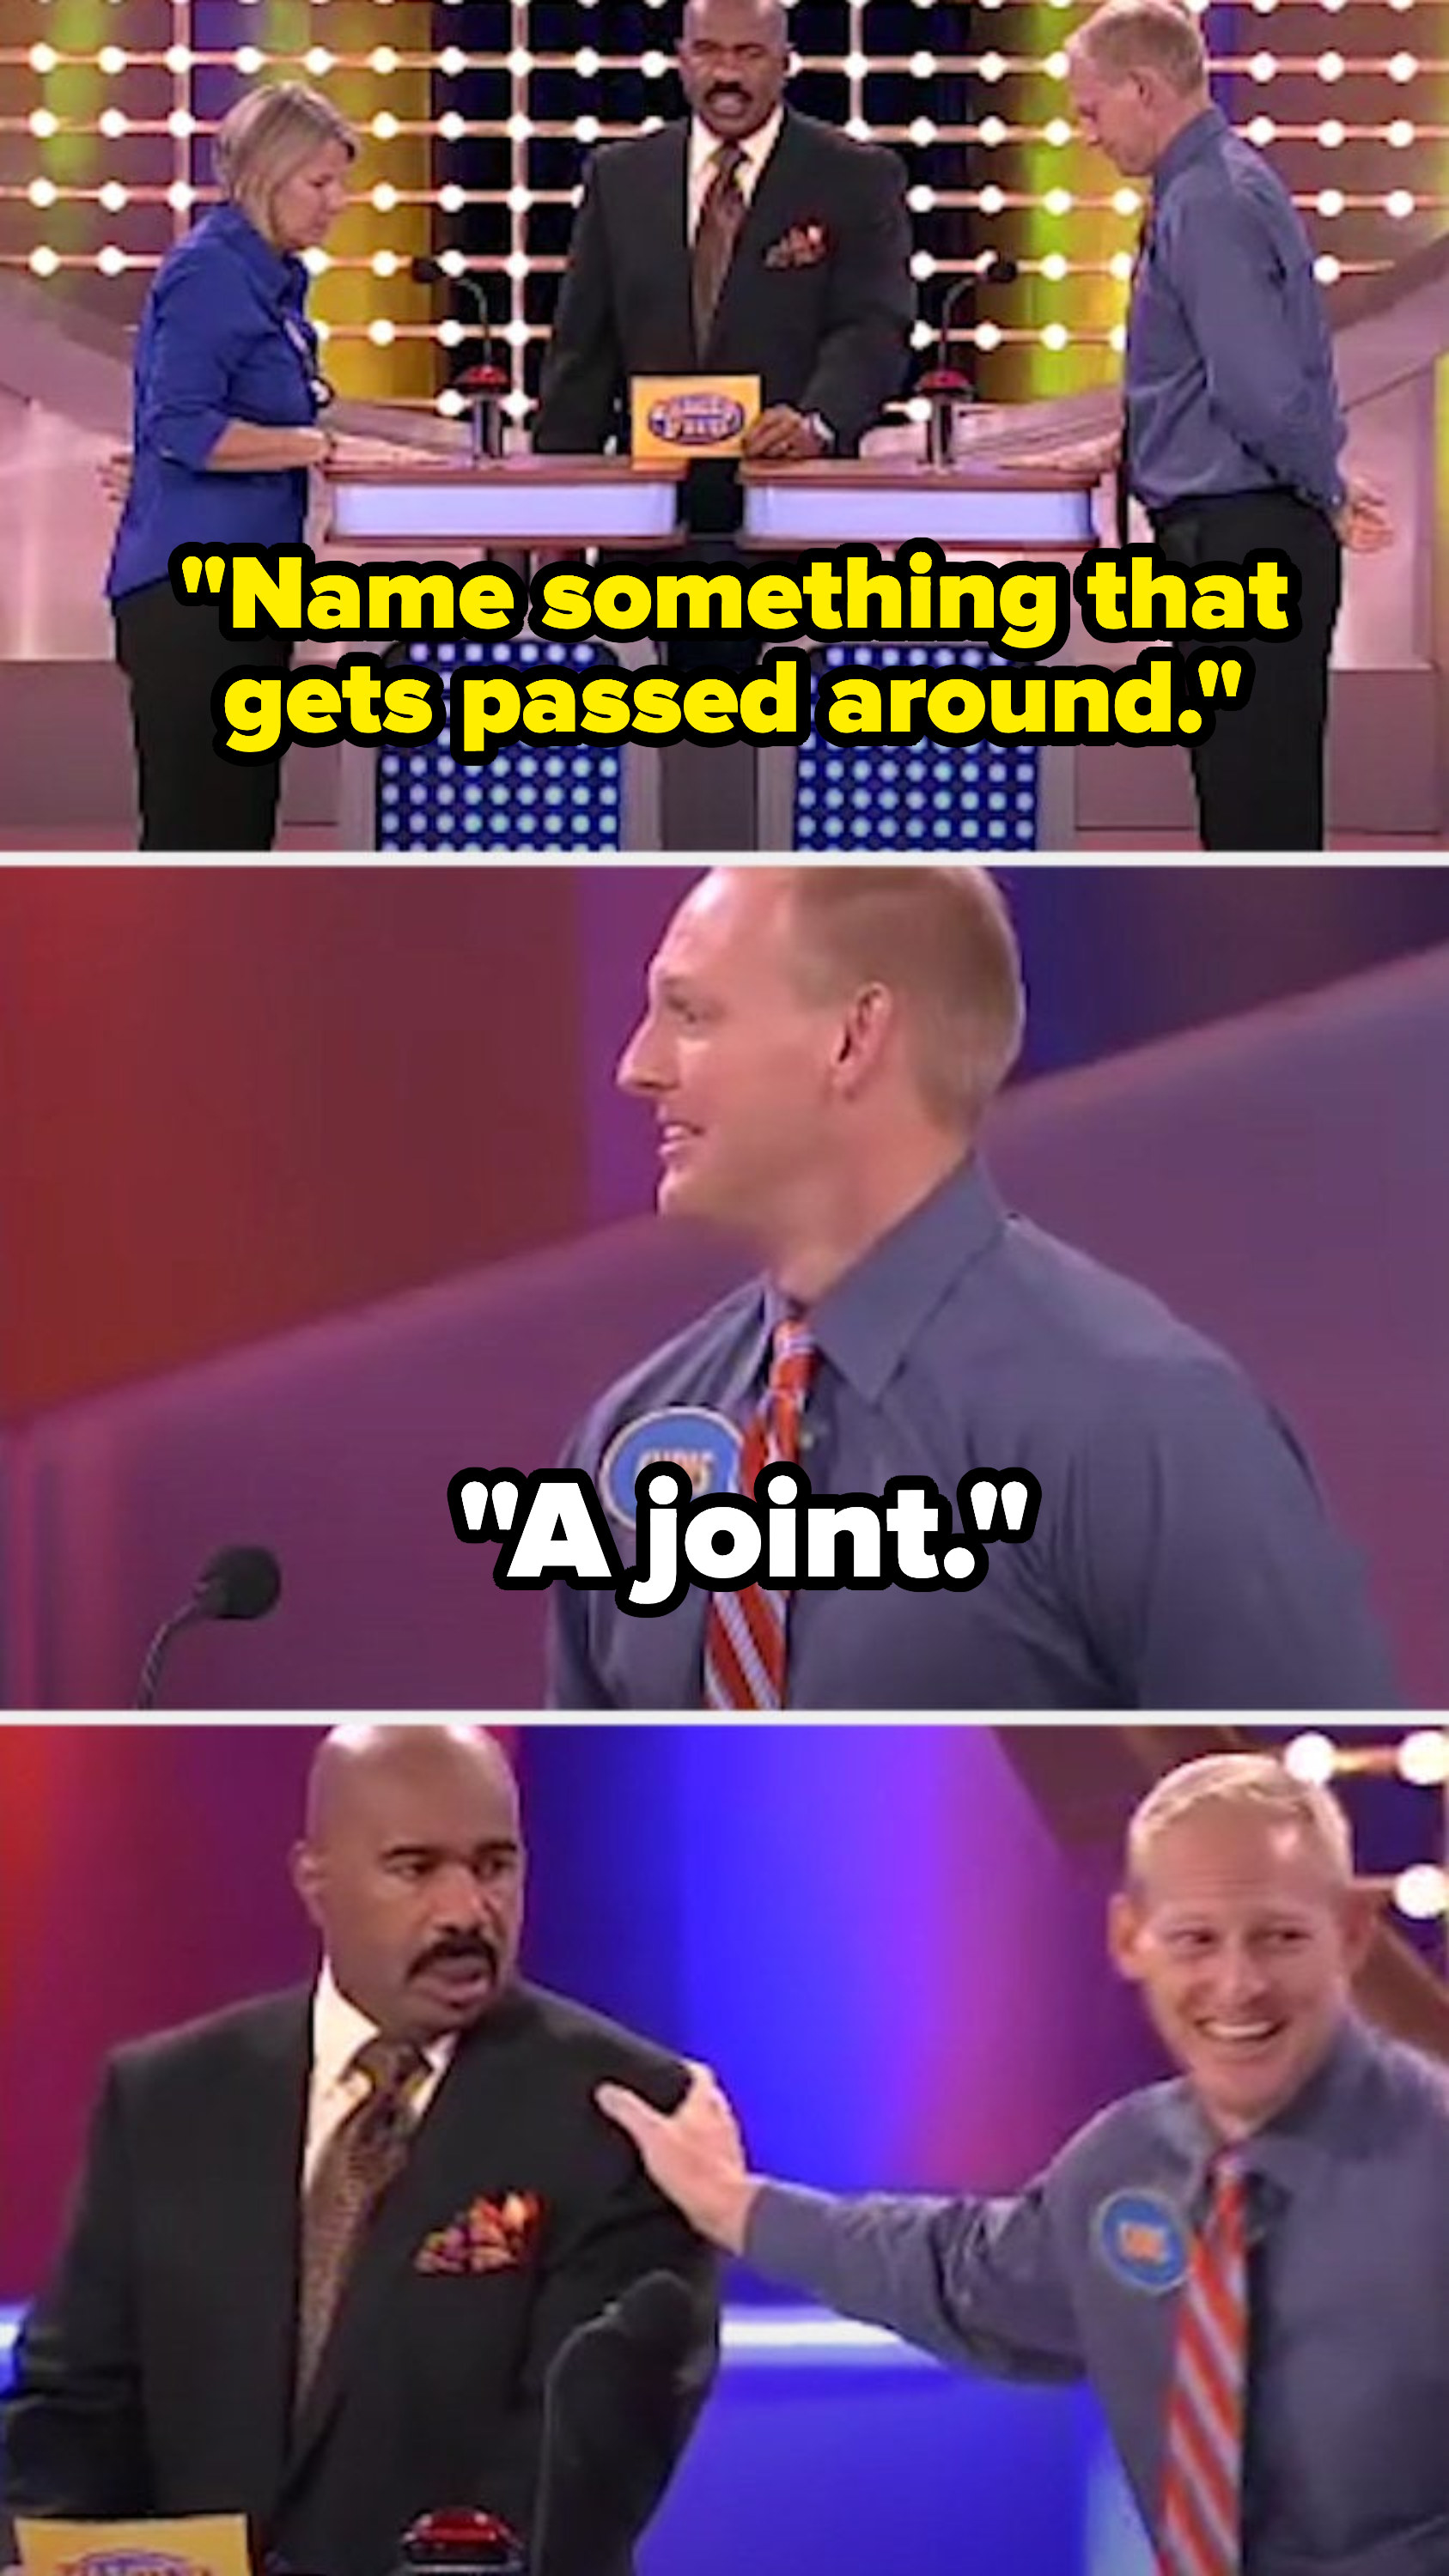 Steve says, &quot;Name something that gets passed around,&quot; and a contestant says, &quot;A joint,&quot; making Steve stare at the contestant in shock as he continues laughing